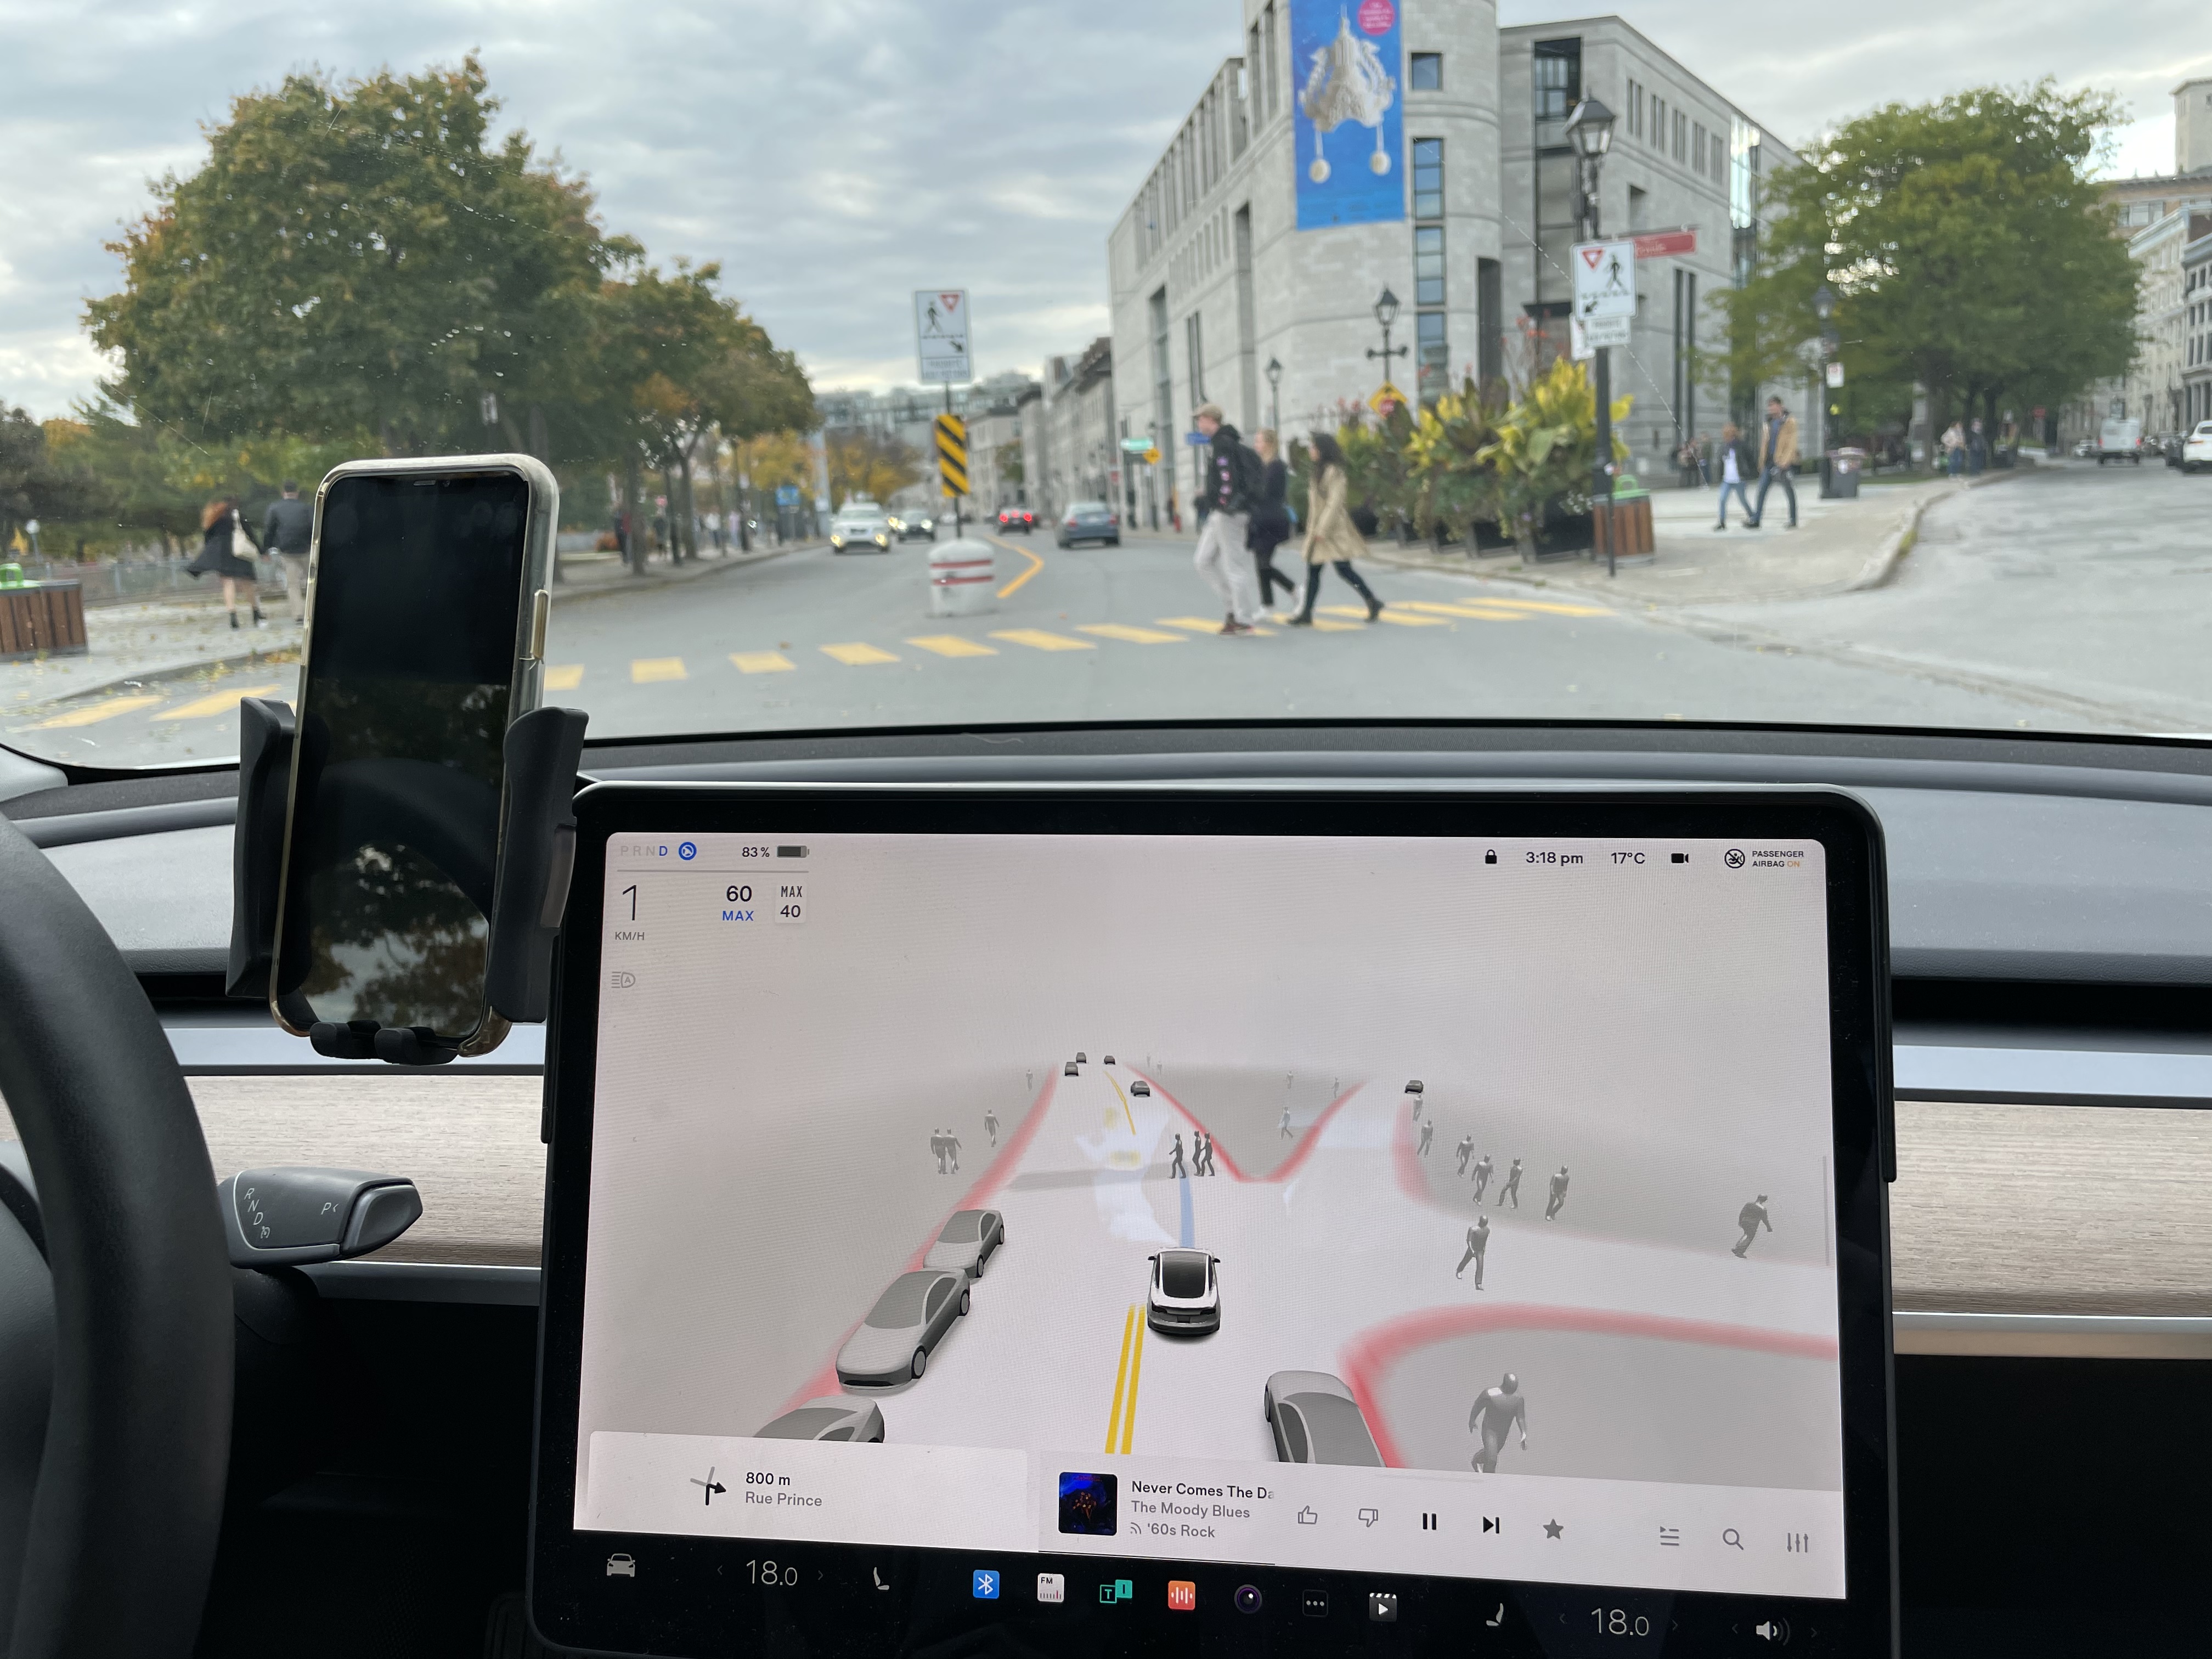 Gallery: Riding in the Tesla Model 3 with Full Self-Driving (FSD)